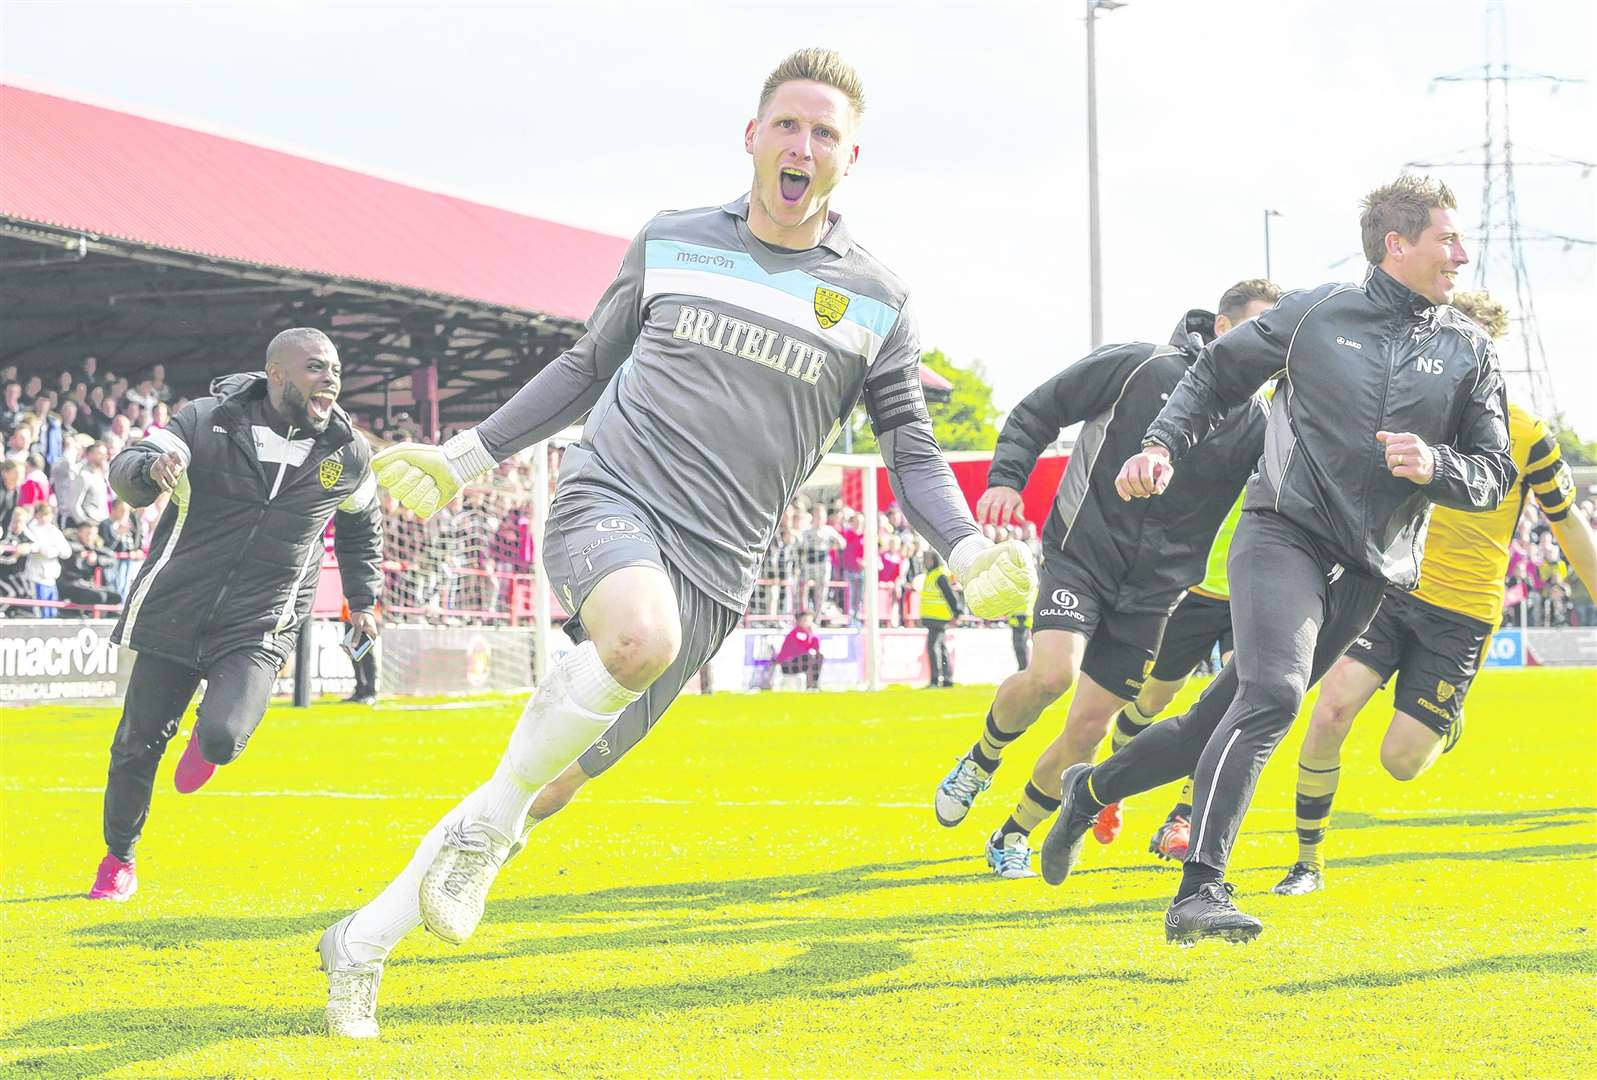 Lee Worgan celebrates his winning penalty save in the 2016 National South play-off final at Ebbsfleet Picture: Andy Payton